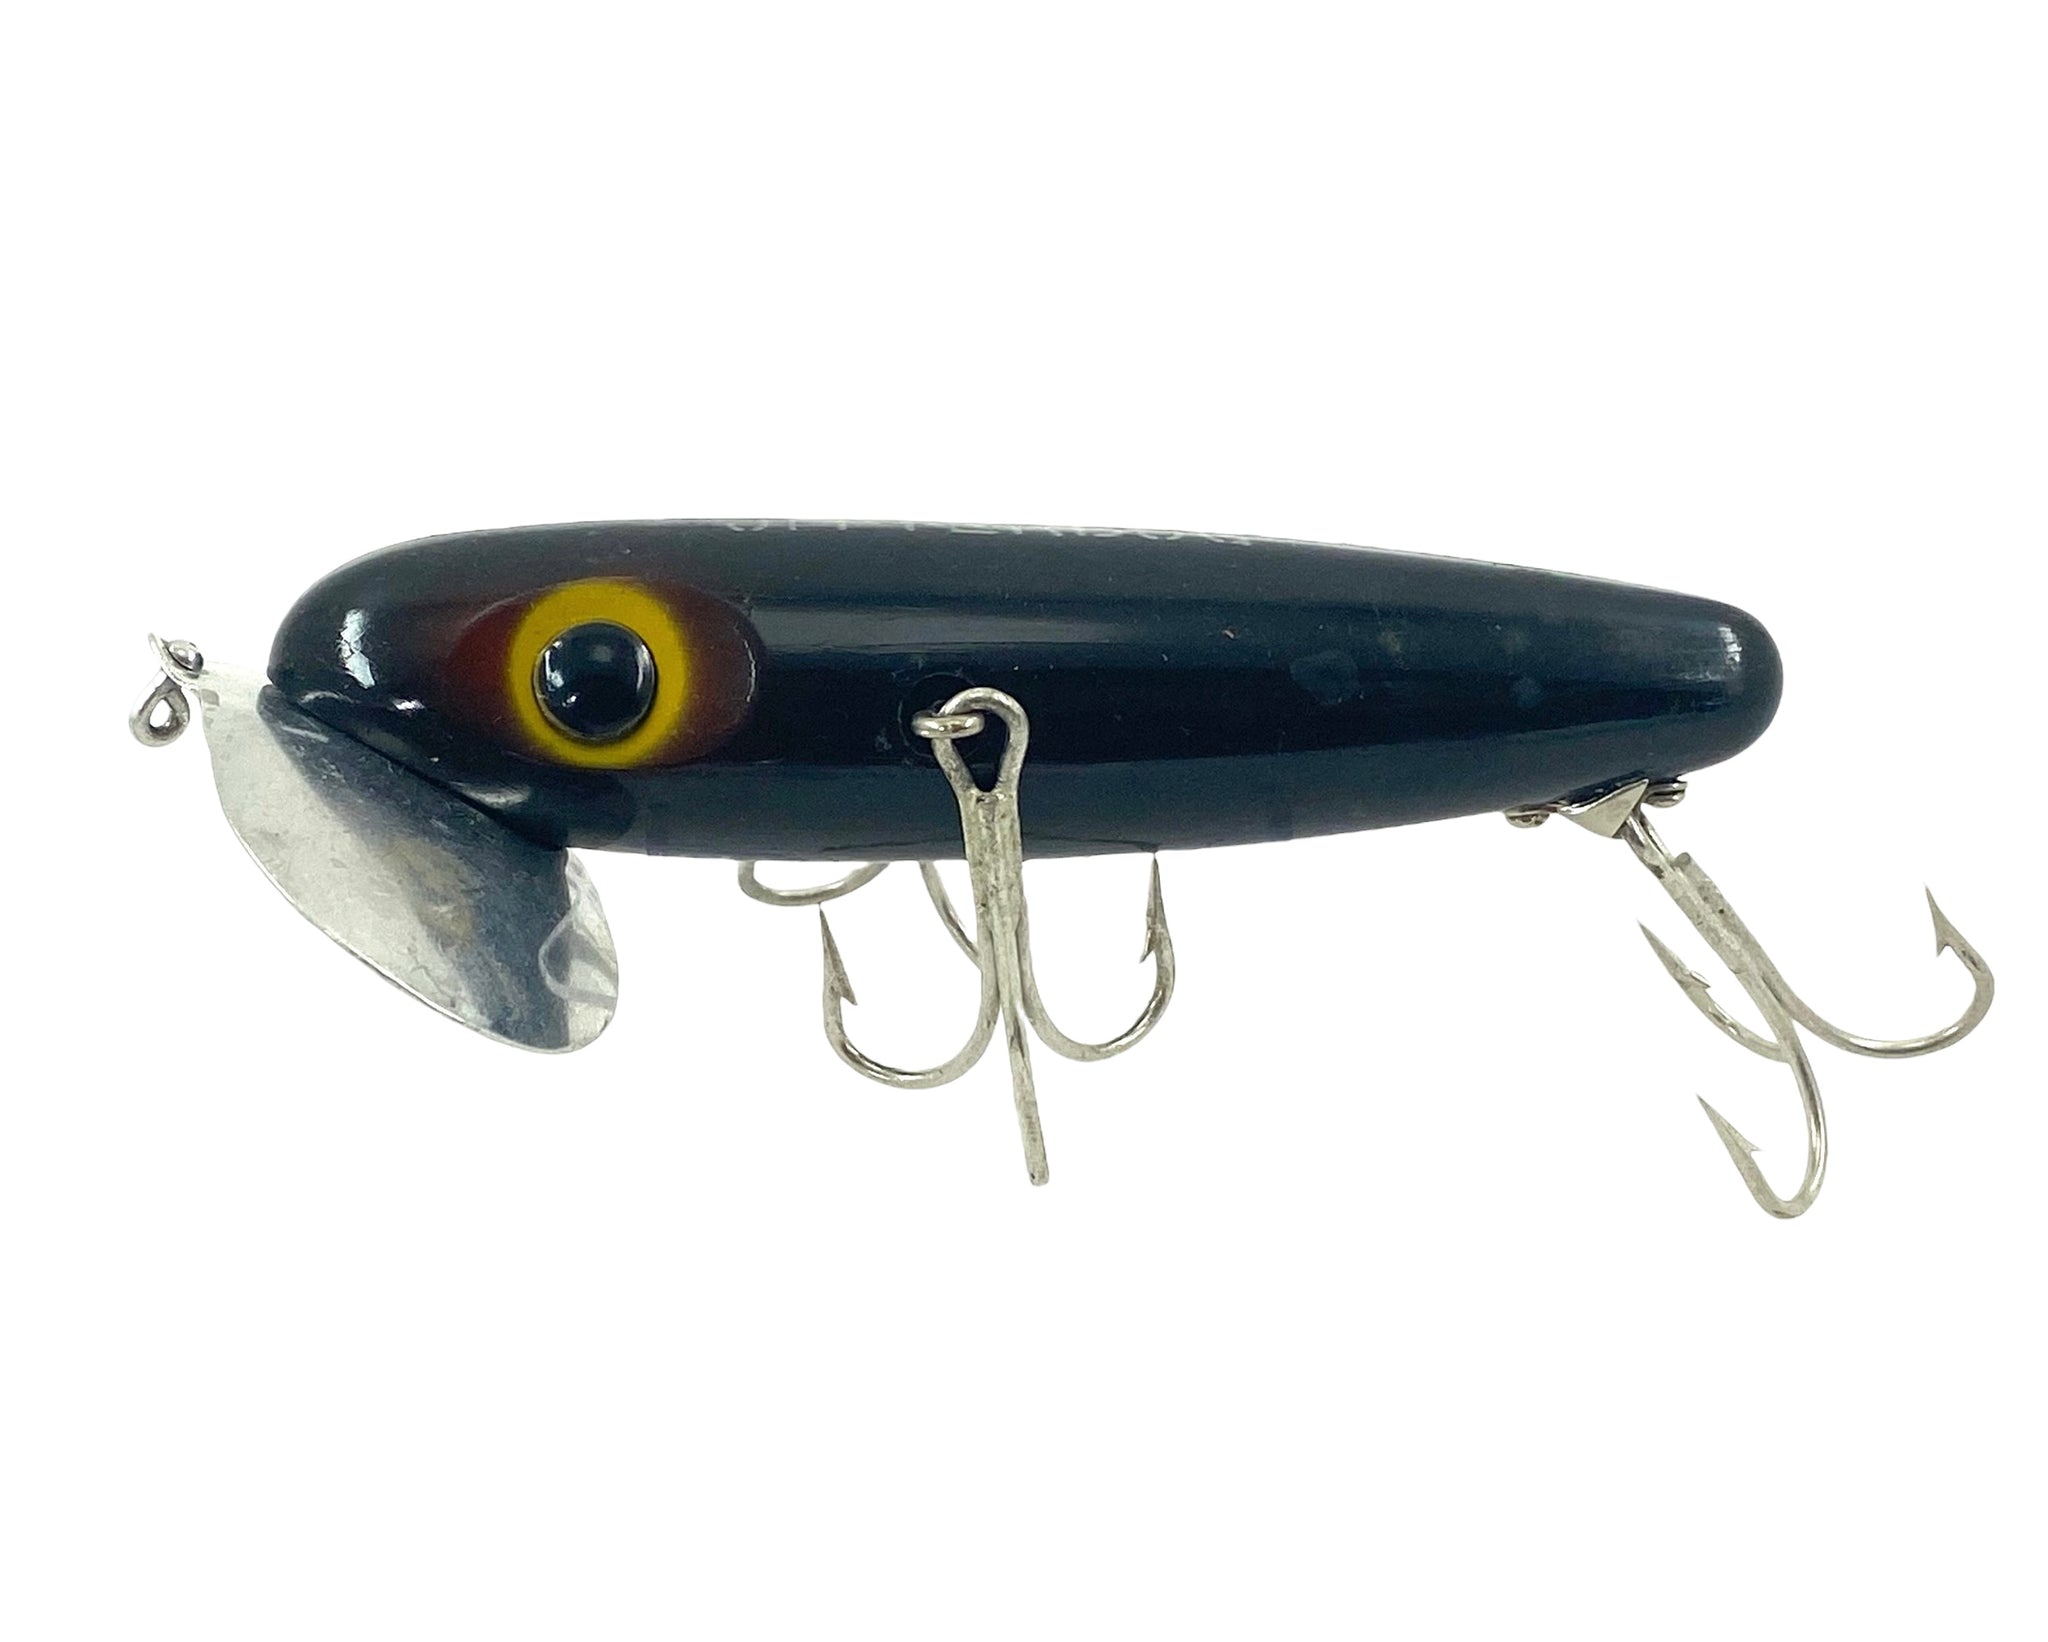 FRED ARBOGAST MUSKY SIZE JITTERBUG Fishing Lure in Original Box • #700 –  Toad Tackle